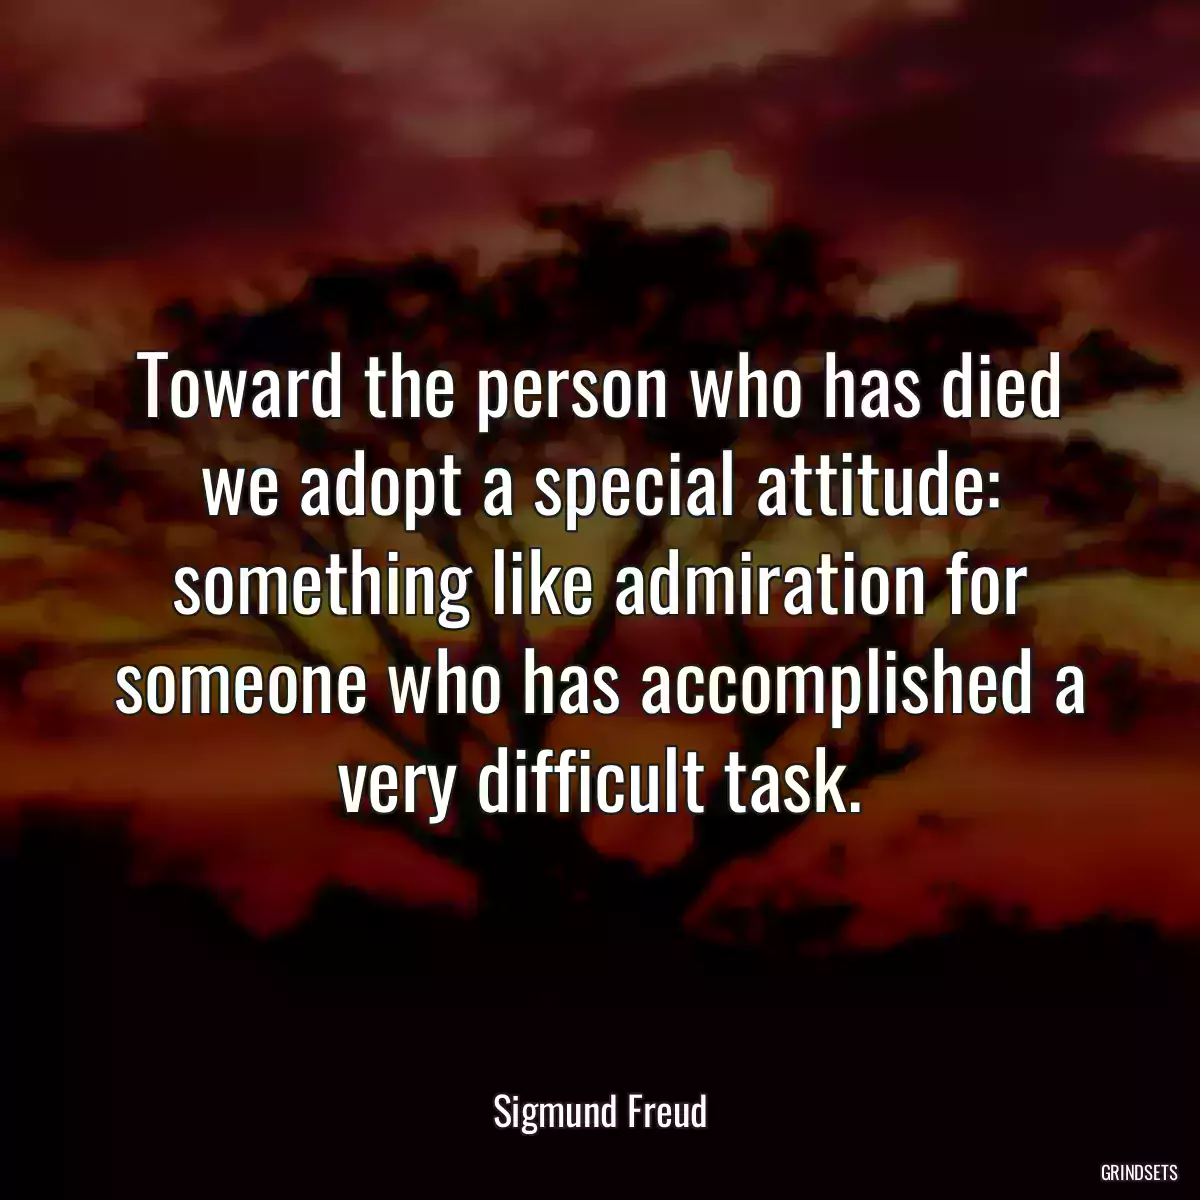 Toward the person who has died we adopt a special attitude: something like admiration for someone who has accomplished a very difficult task.